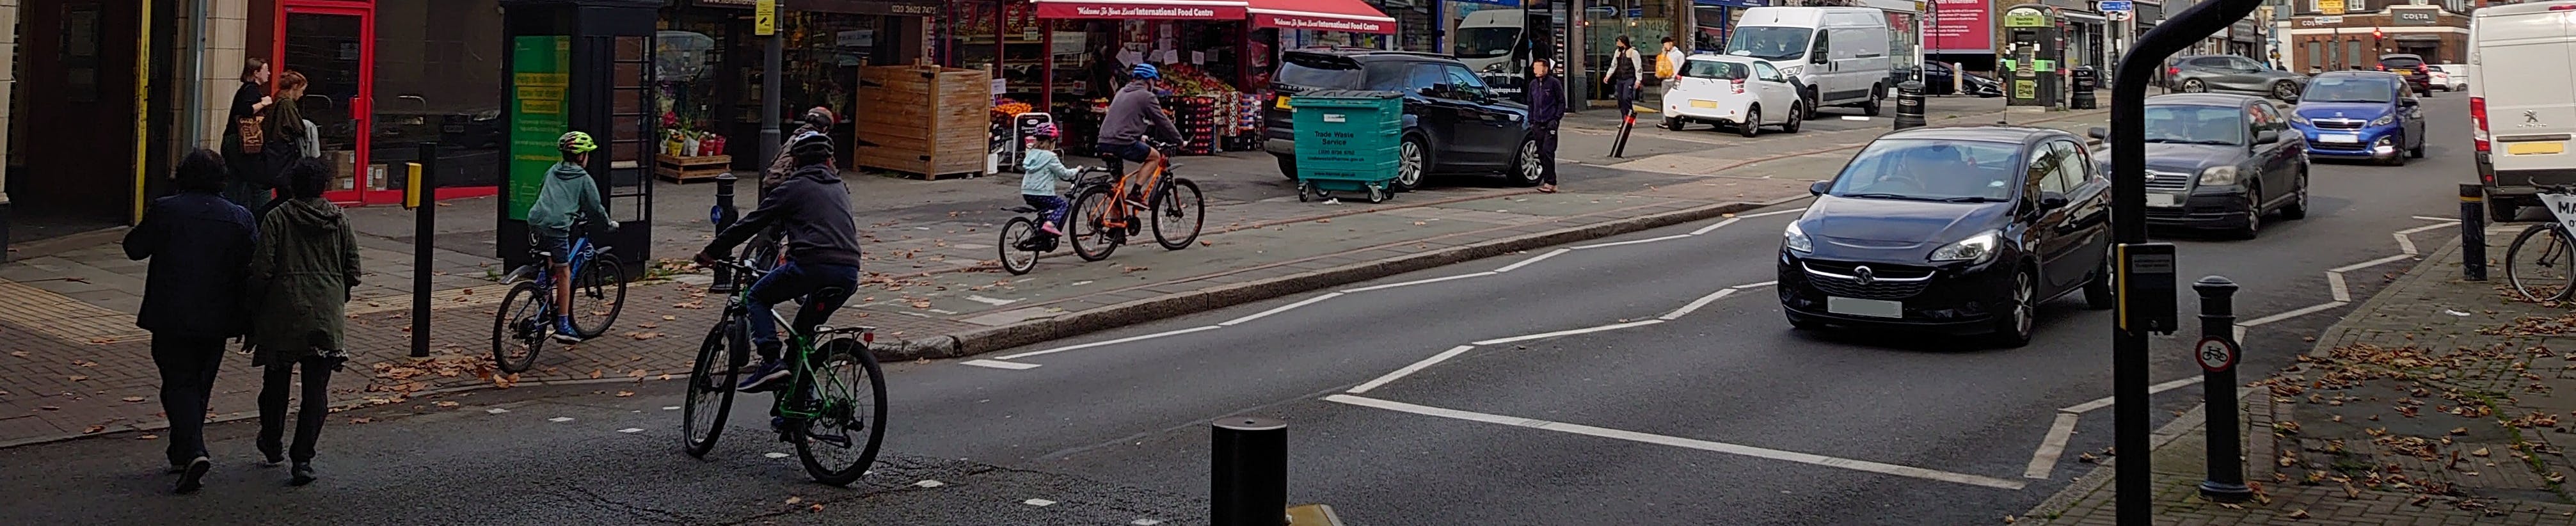 Image showing cyclists across pedestrian crossing